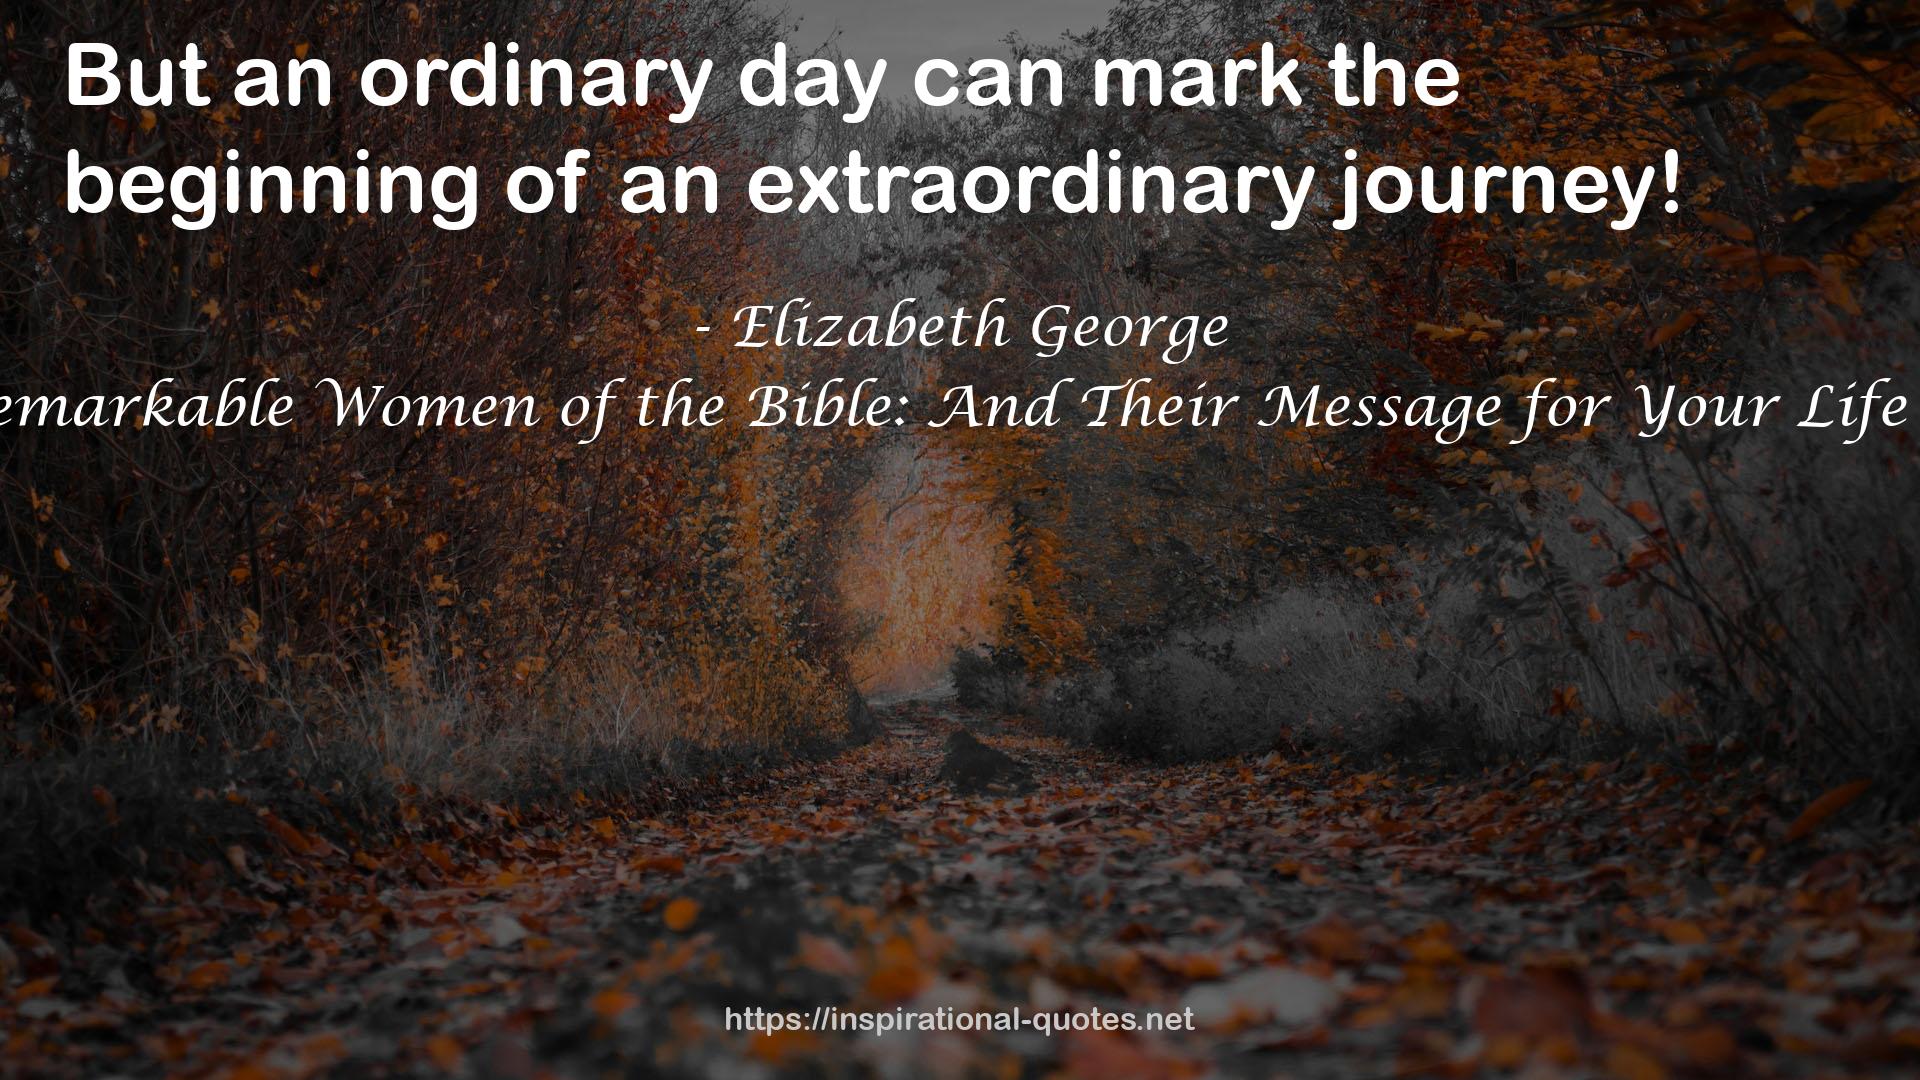 The Remarkable Women of the Bible: And Their Message for Your Life Today QUOTES